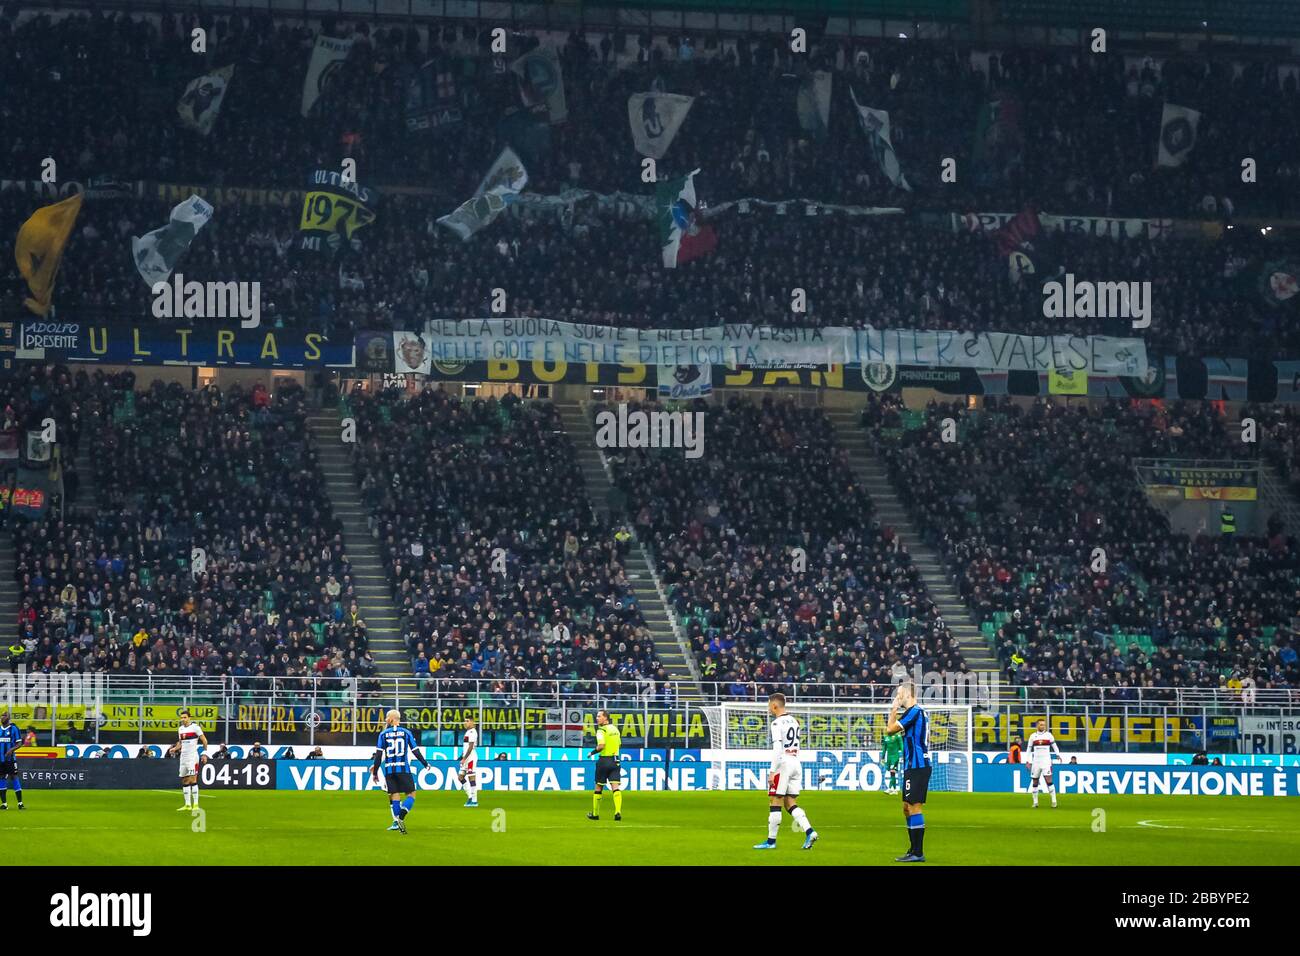 FC Internazionale supporters during soccer season 2019/20 symbolic images - Photo credit Fabrizio Carabelli /LM/ Stock Photo